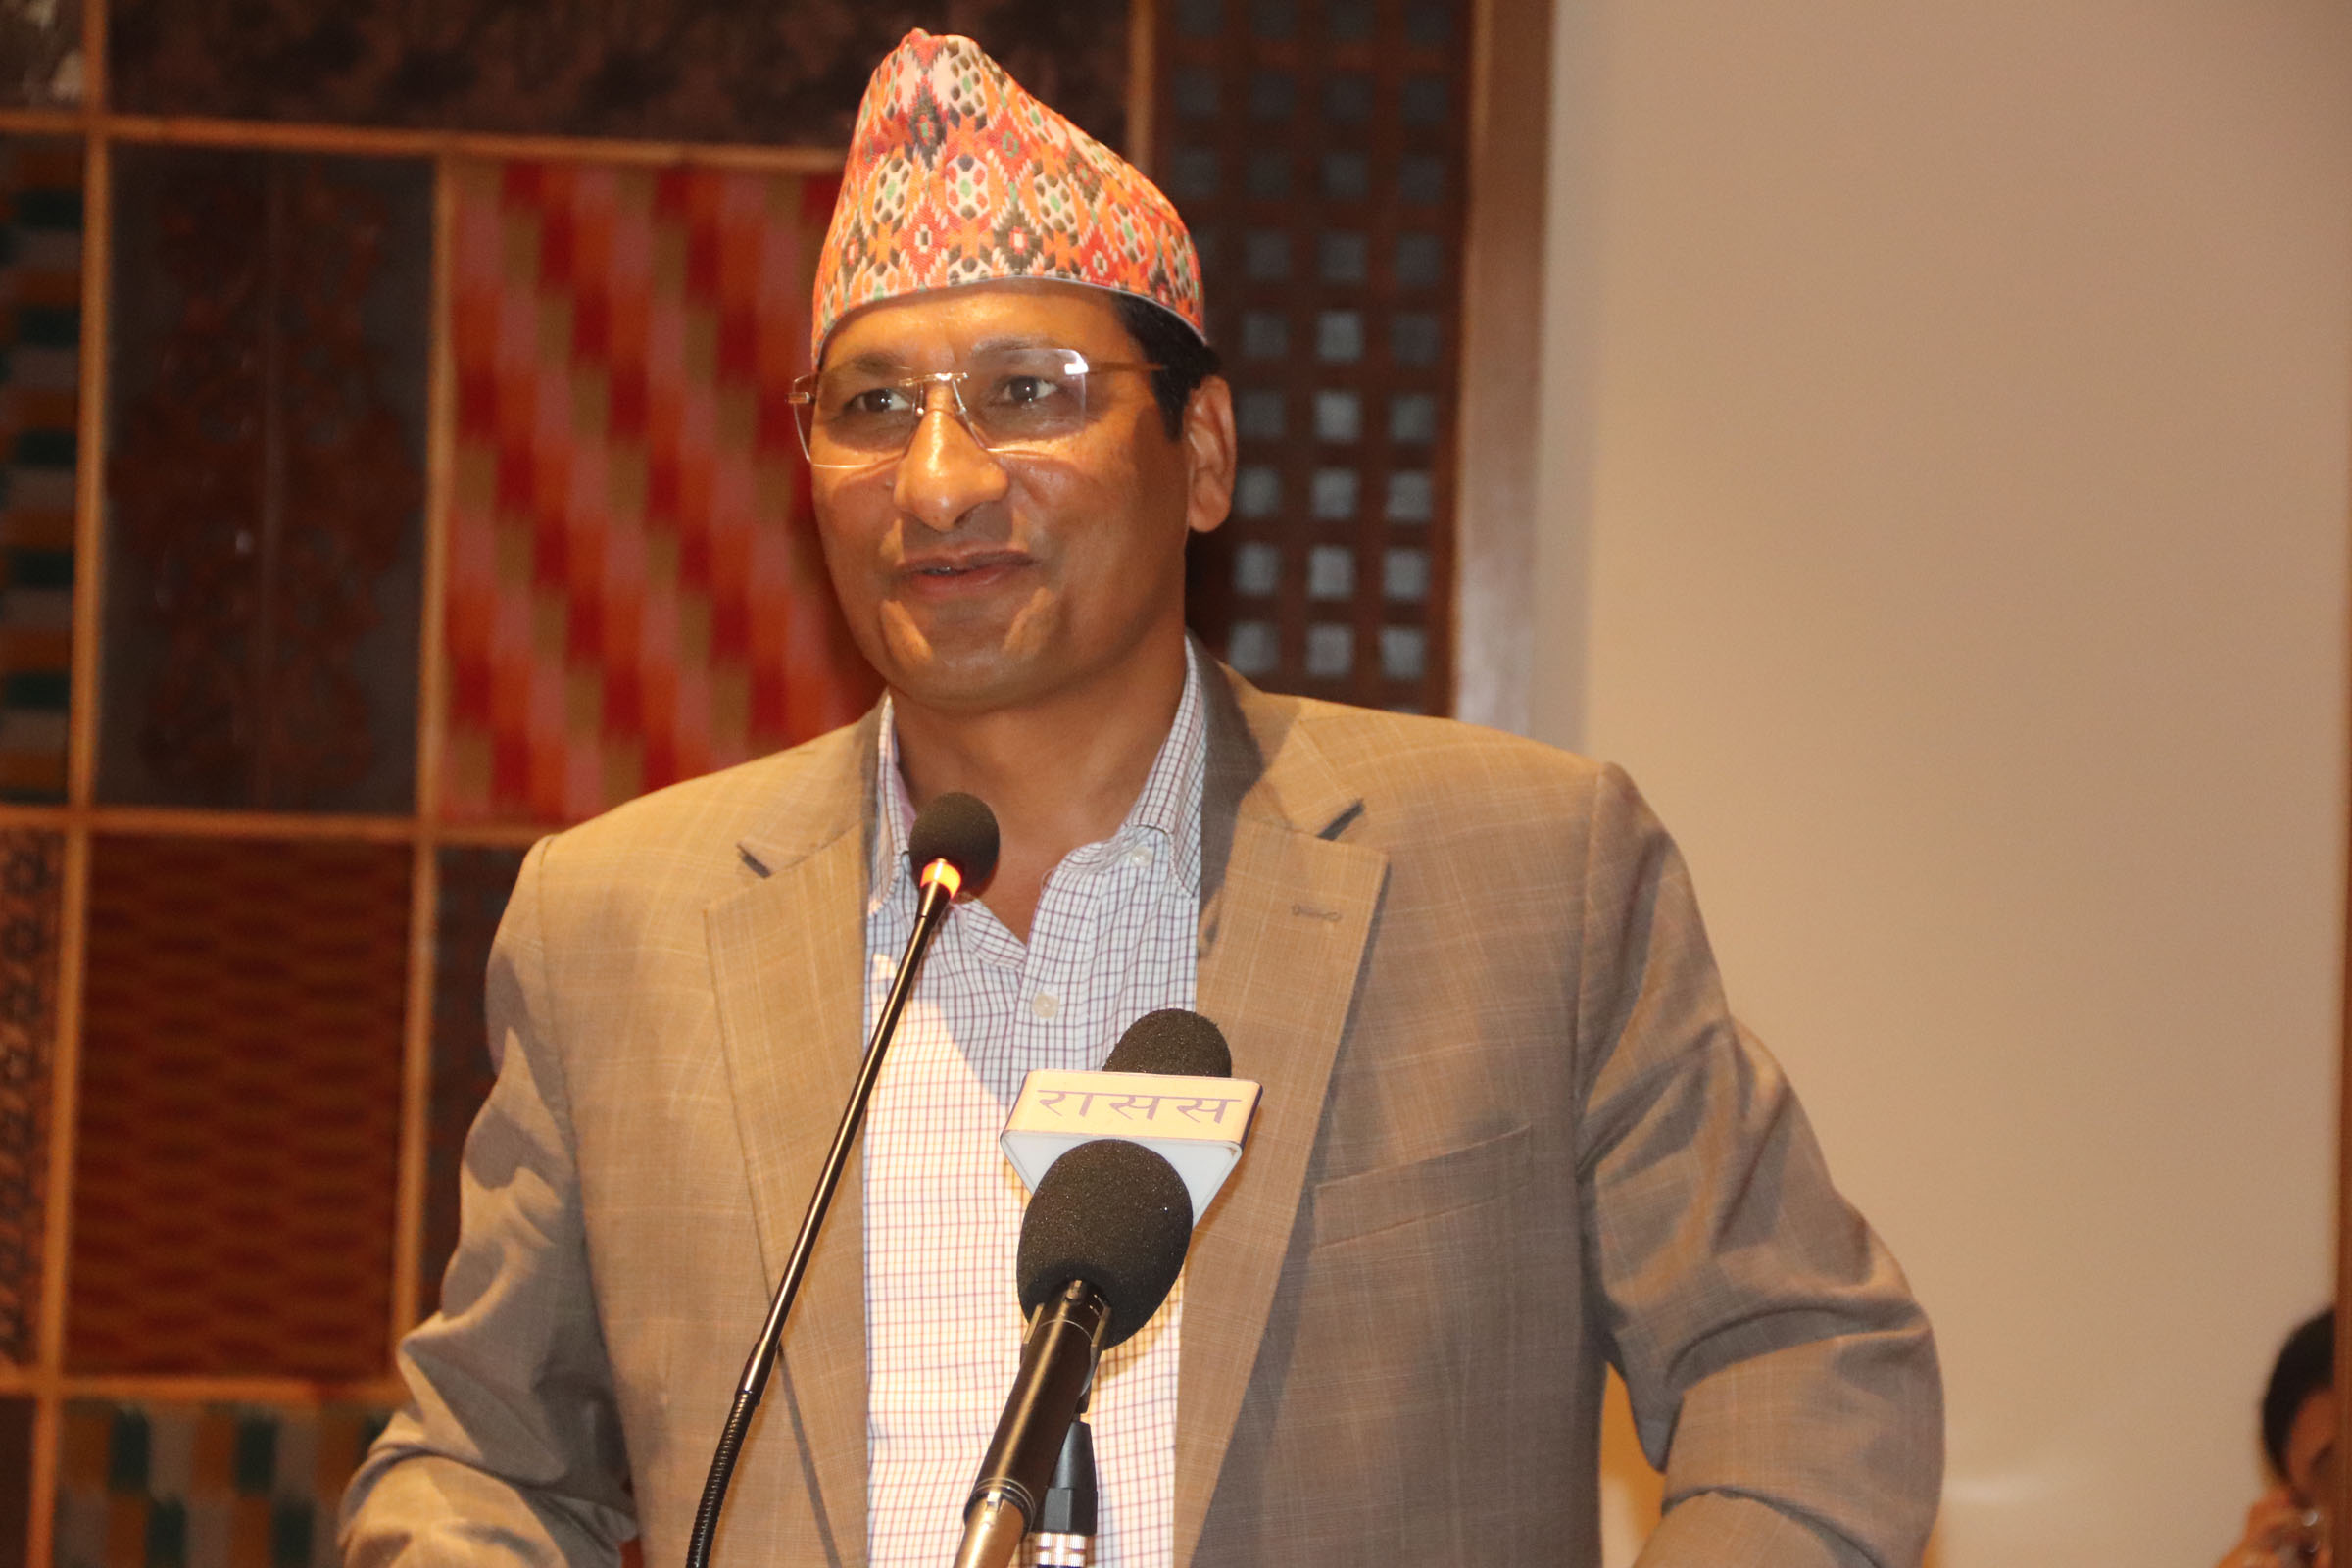 Electricity Bill will be presented in parliament within a week: Minister Basnet